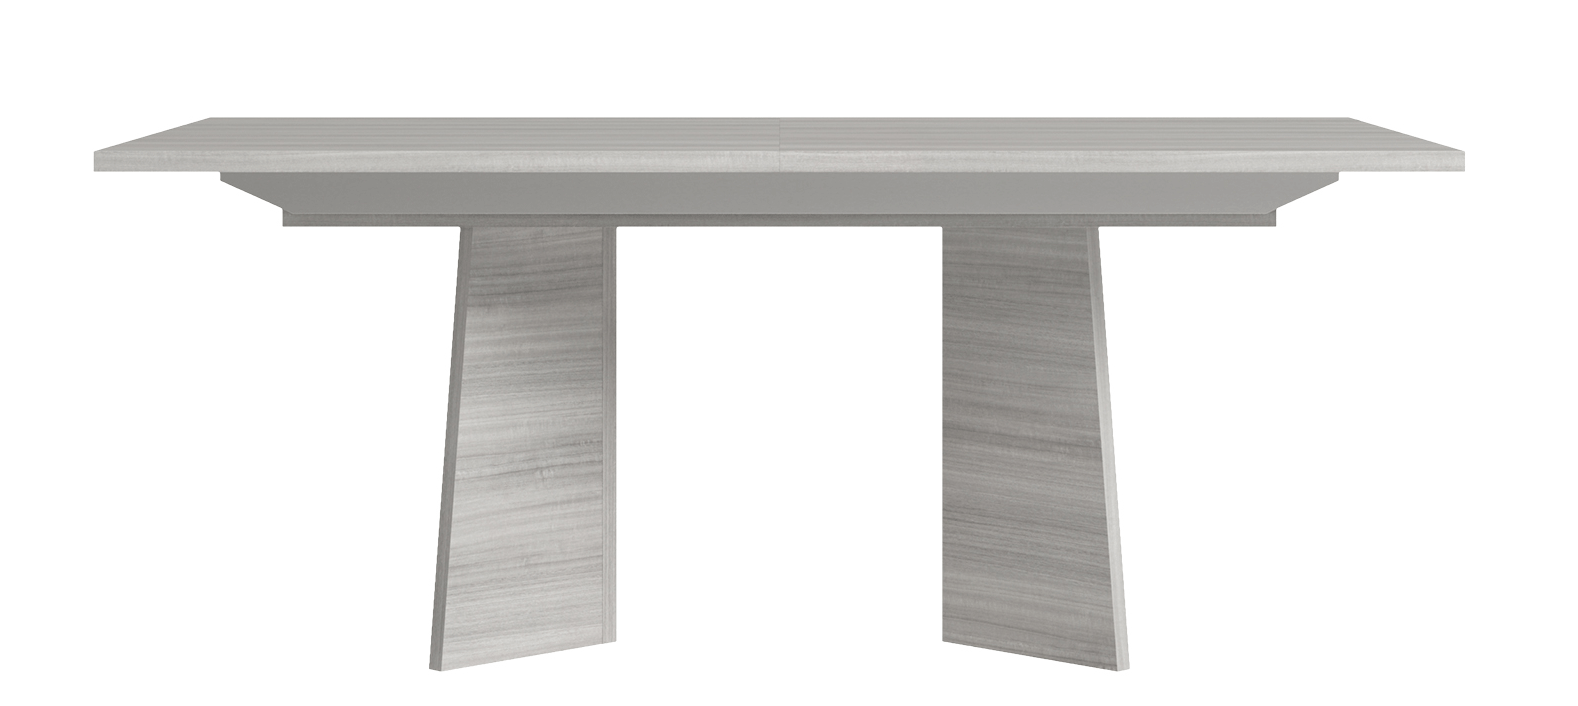 Brands Garcia Laurel & Hardy Tables Mia Dining Table